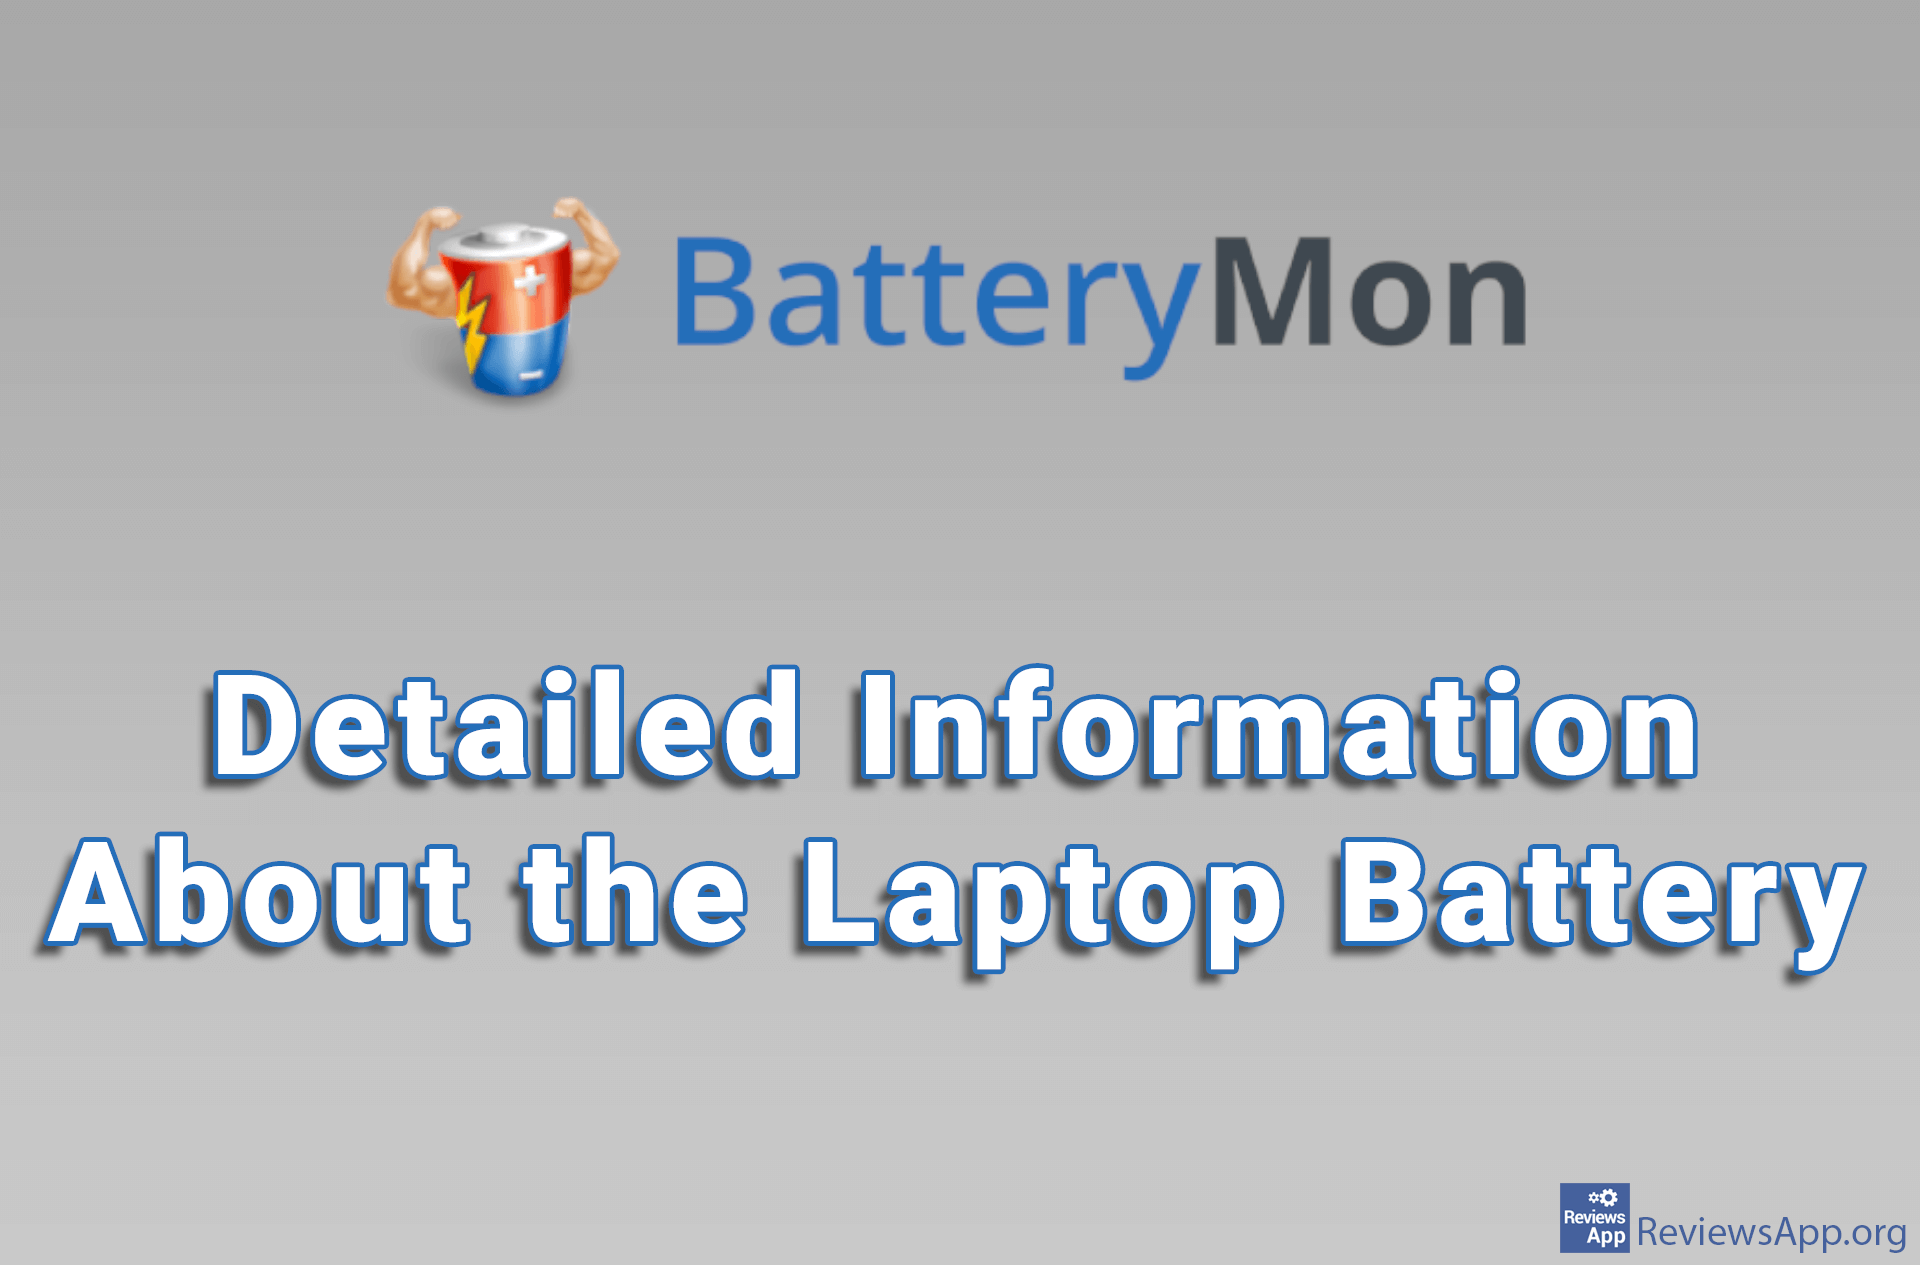 BatteryMon – Detailed Information About the Laptop Battery